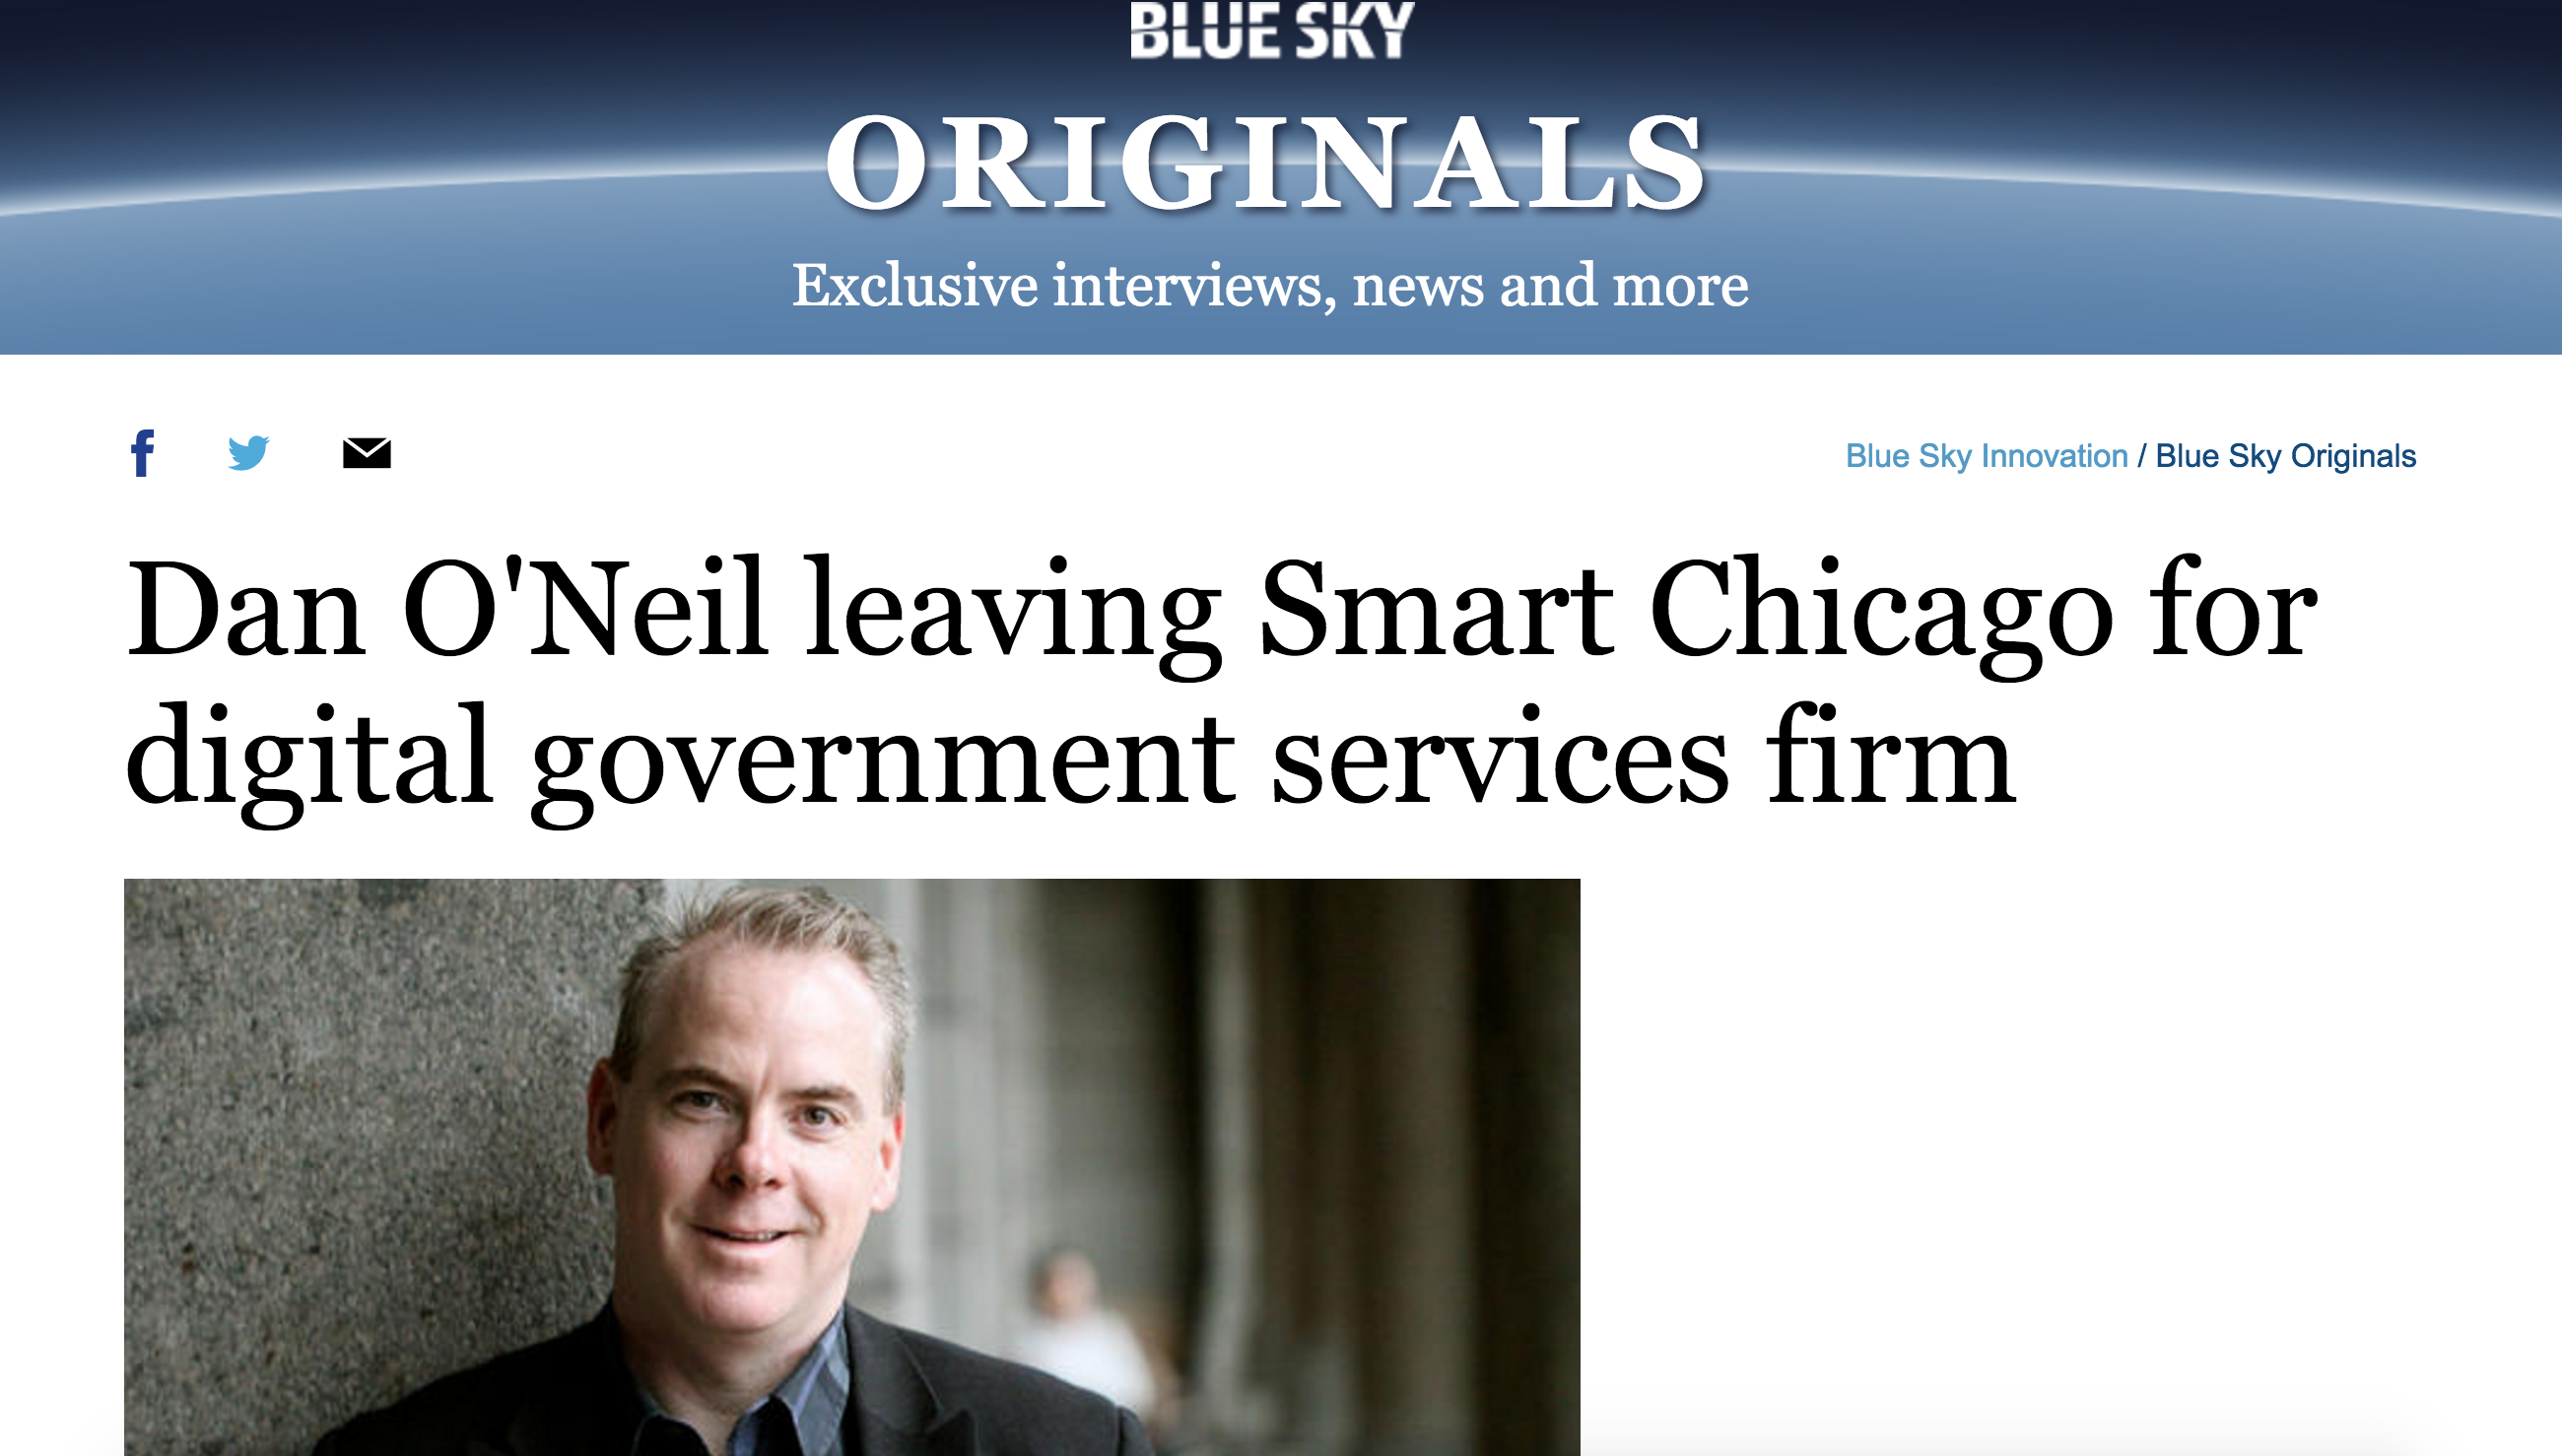 News story: Dan O’Neil leaving Smart Chicago for digital government services firm